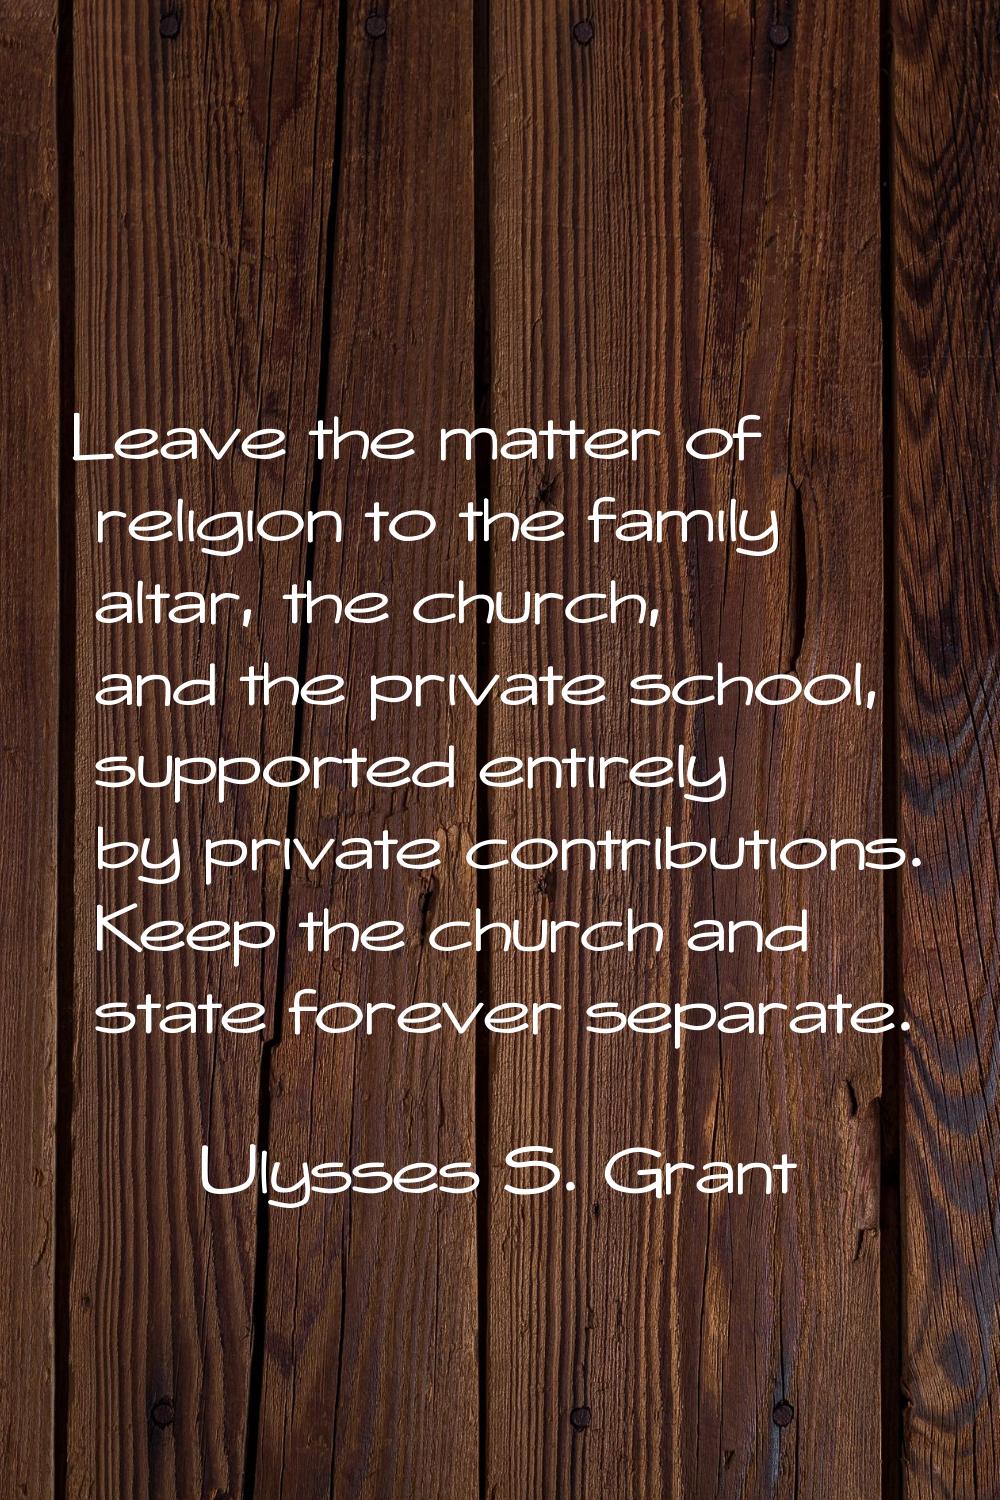 Leave the matter of religion to the family altar, the church, and the private school, supported ent